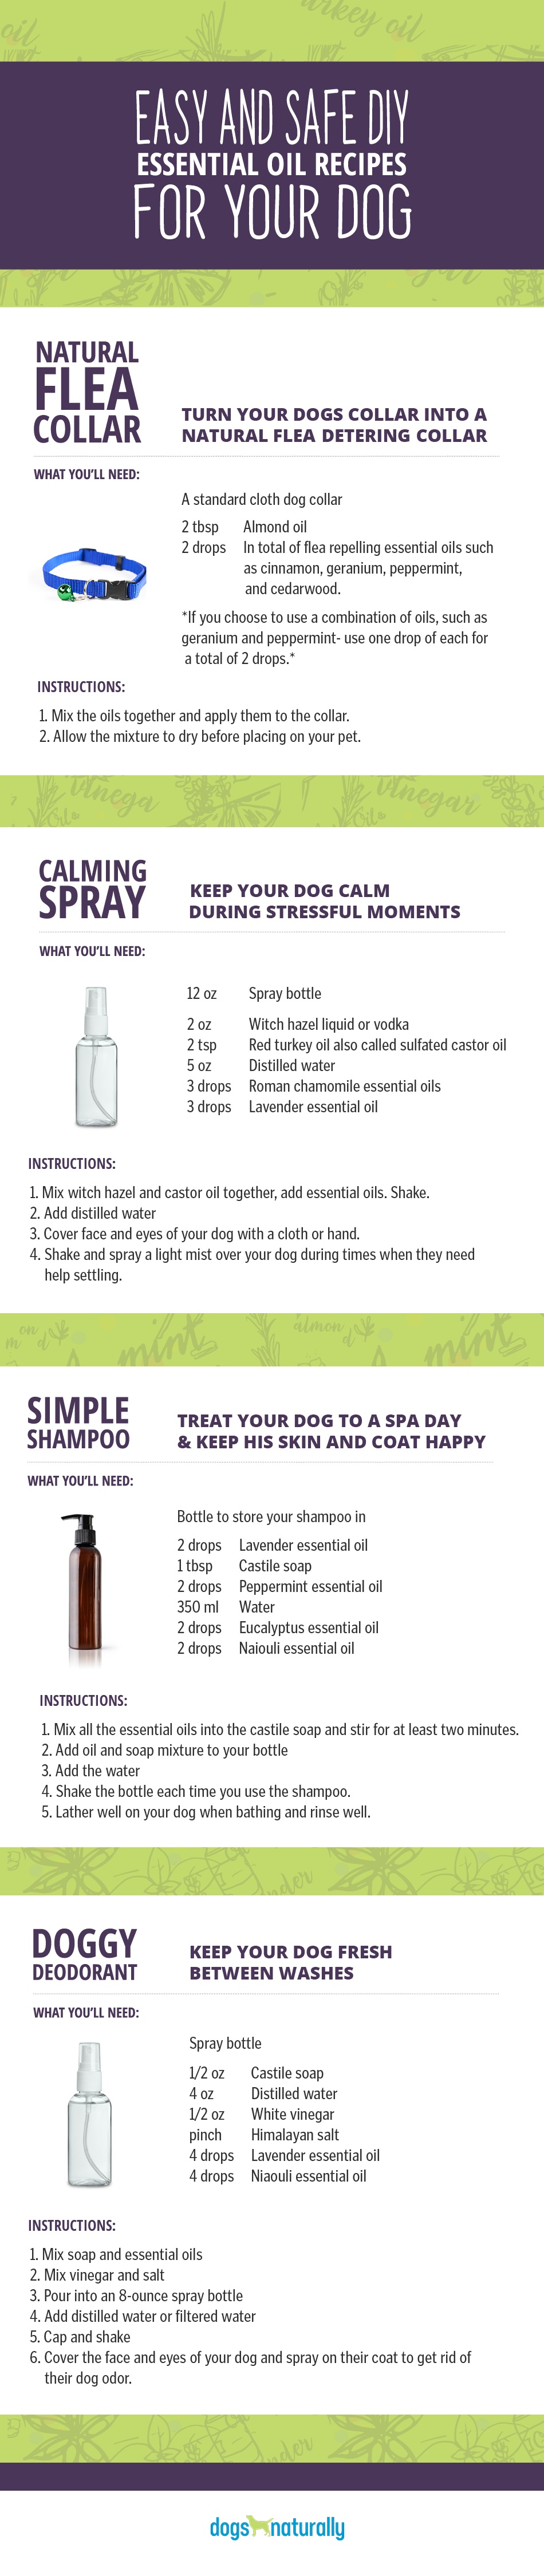 Photo of each DIY Essential Oil Recipes For Dogs. Includes Natural Flea Collar, Calming Spray, Simple Shampoo and Doggy Deodorant
